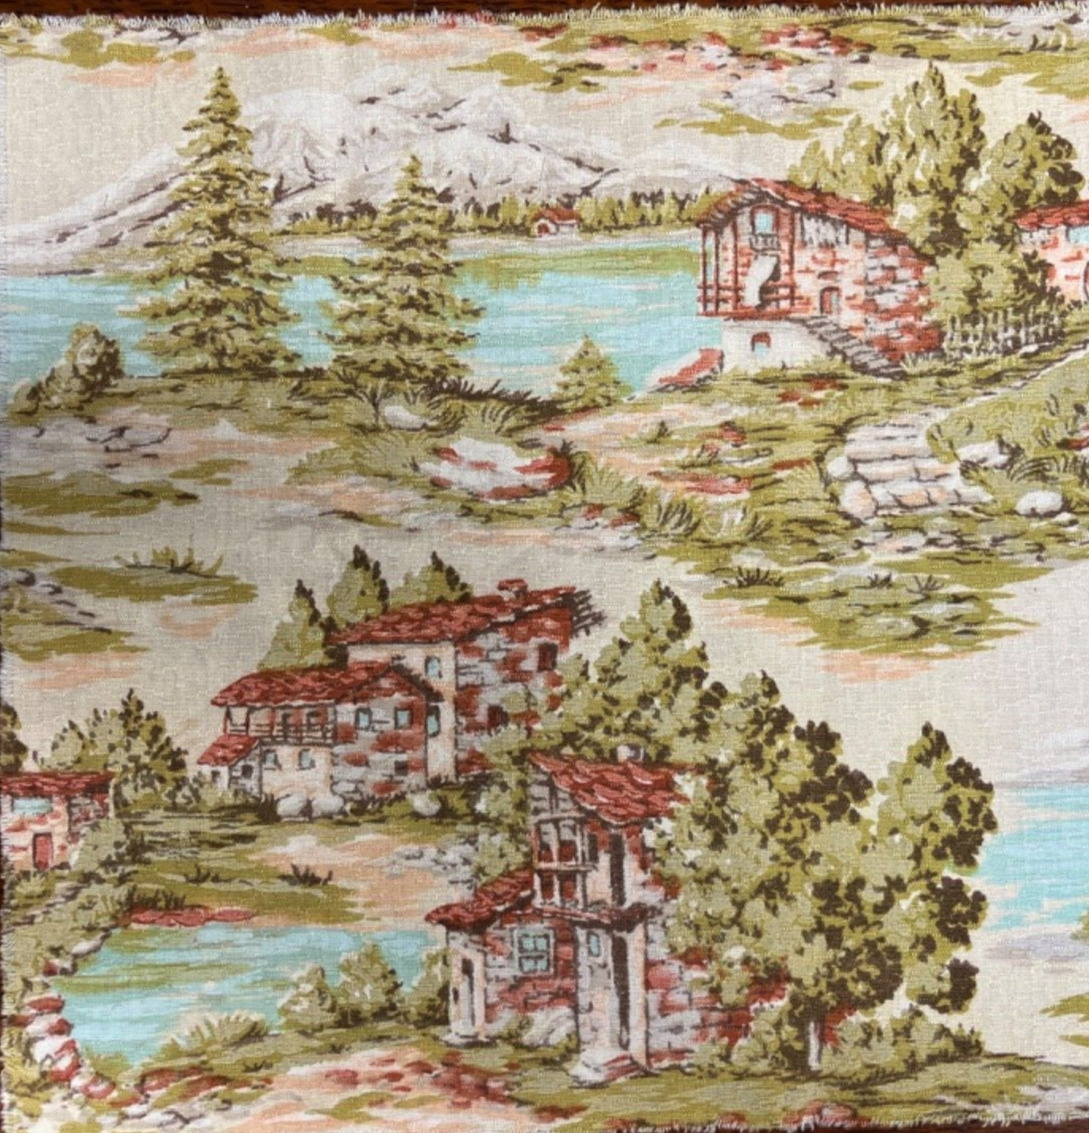 Antique/Vintage Countryside Textured Panel Fabric from Italy 12x12.5\